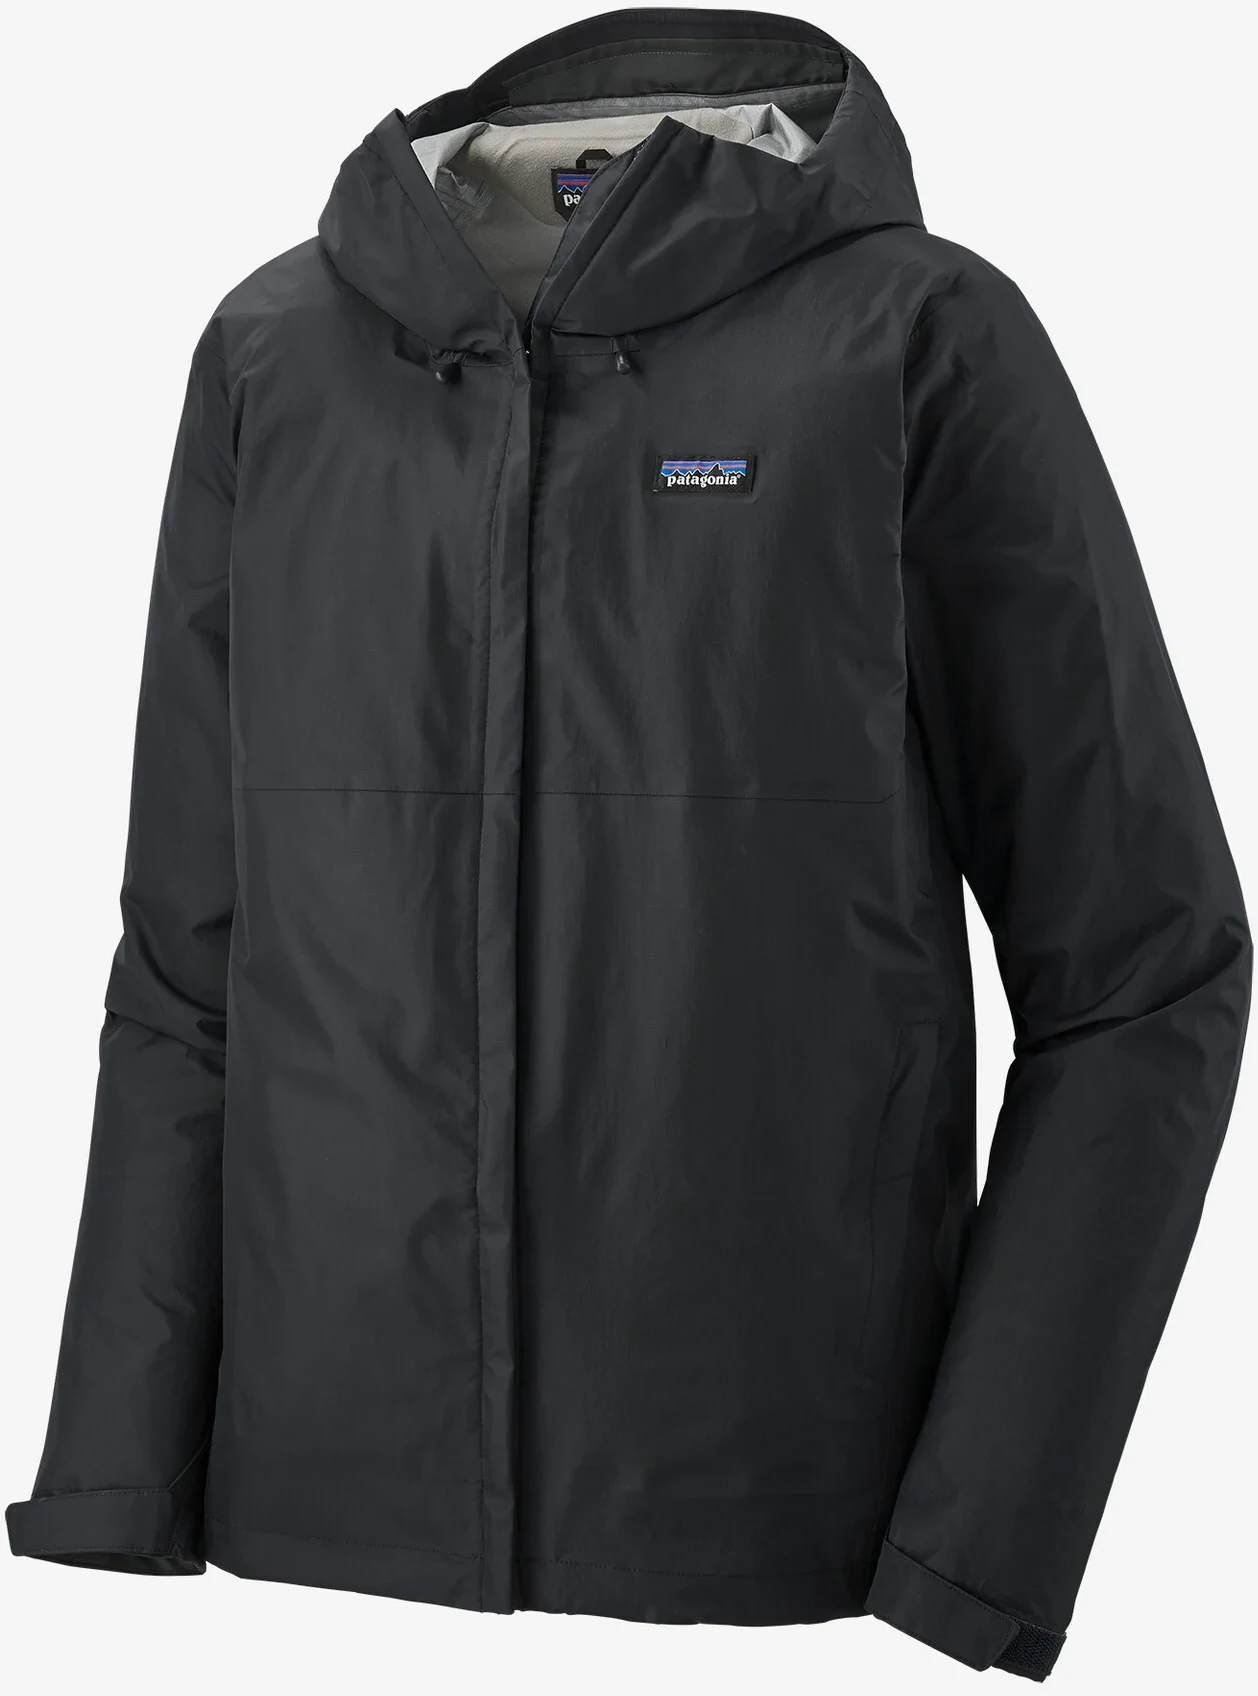 Unlock Wilderness' choice in the Patagonia Vs North Face comparison, the Torrentshell 3L Jacket by Patagonia